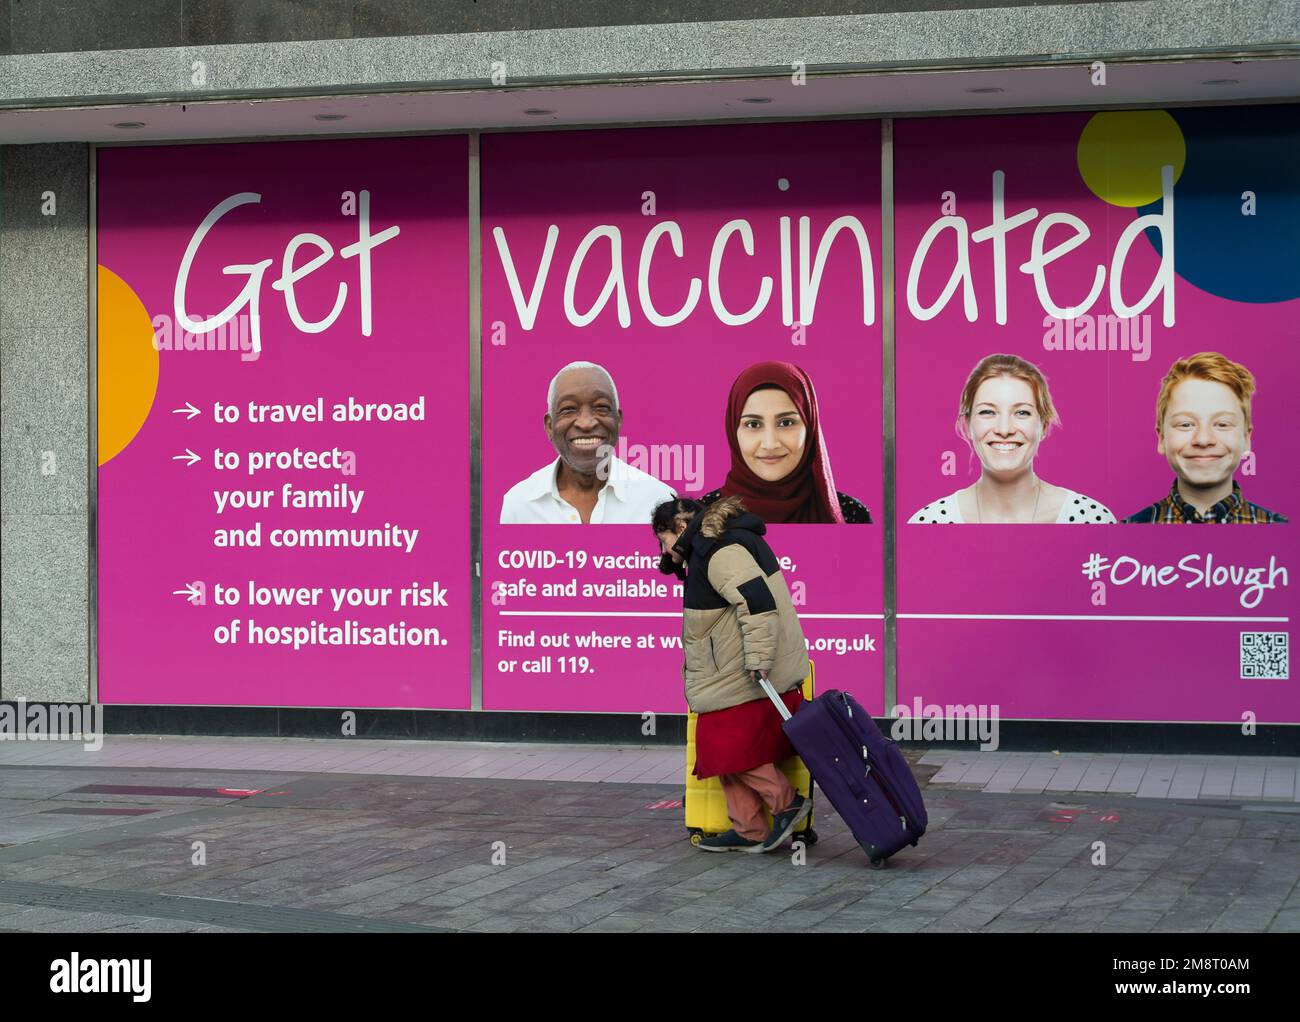 Slough, Berkshire, UK. 15th January, 2023. A homeless lady walks past a Get Vaccinated sign in Slough High Street. A new Covid-19 XBB.1.5 variant known as Kraken is now showing up in tests in the UK. People are still being advised to get their Covid-19 booster vaccines. The number of people with positive Covid-19 tests over the Christmas period spiked again. Credit: Maureen McLean/Alamy Live News Stock Photo